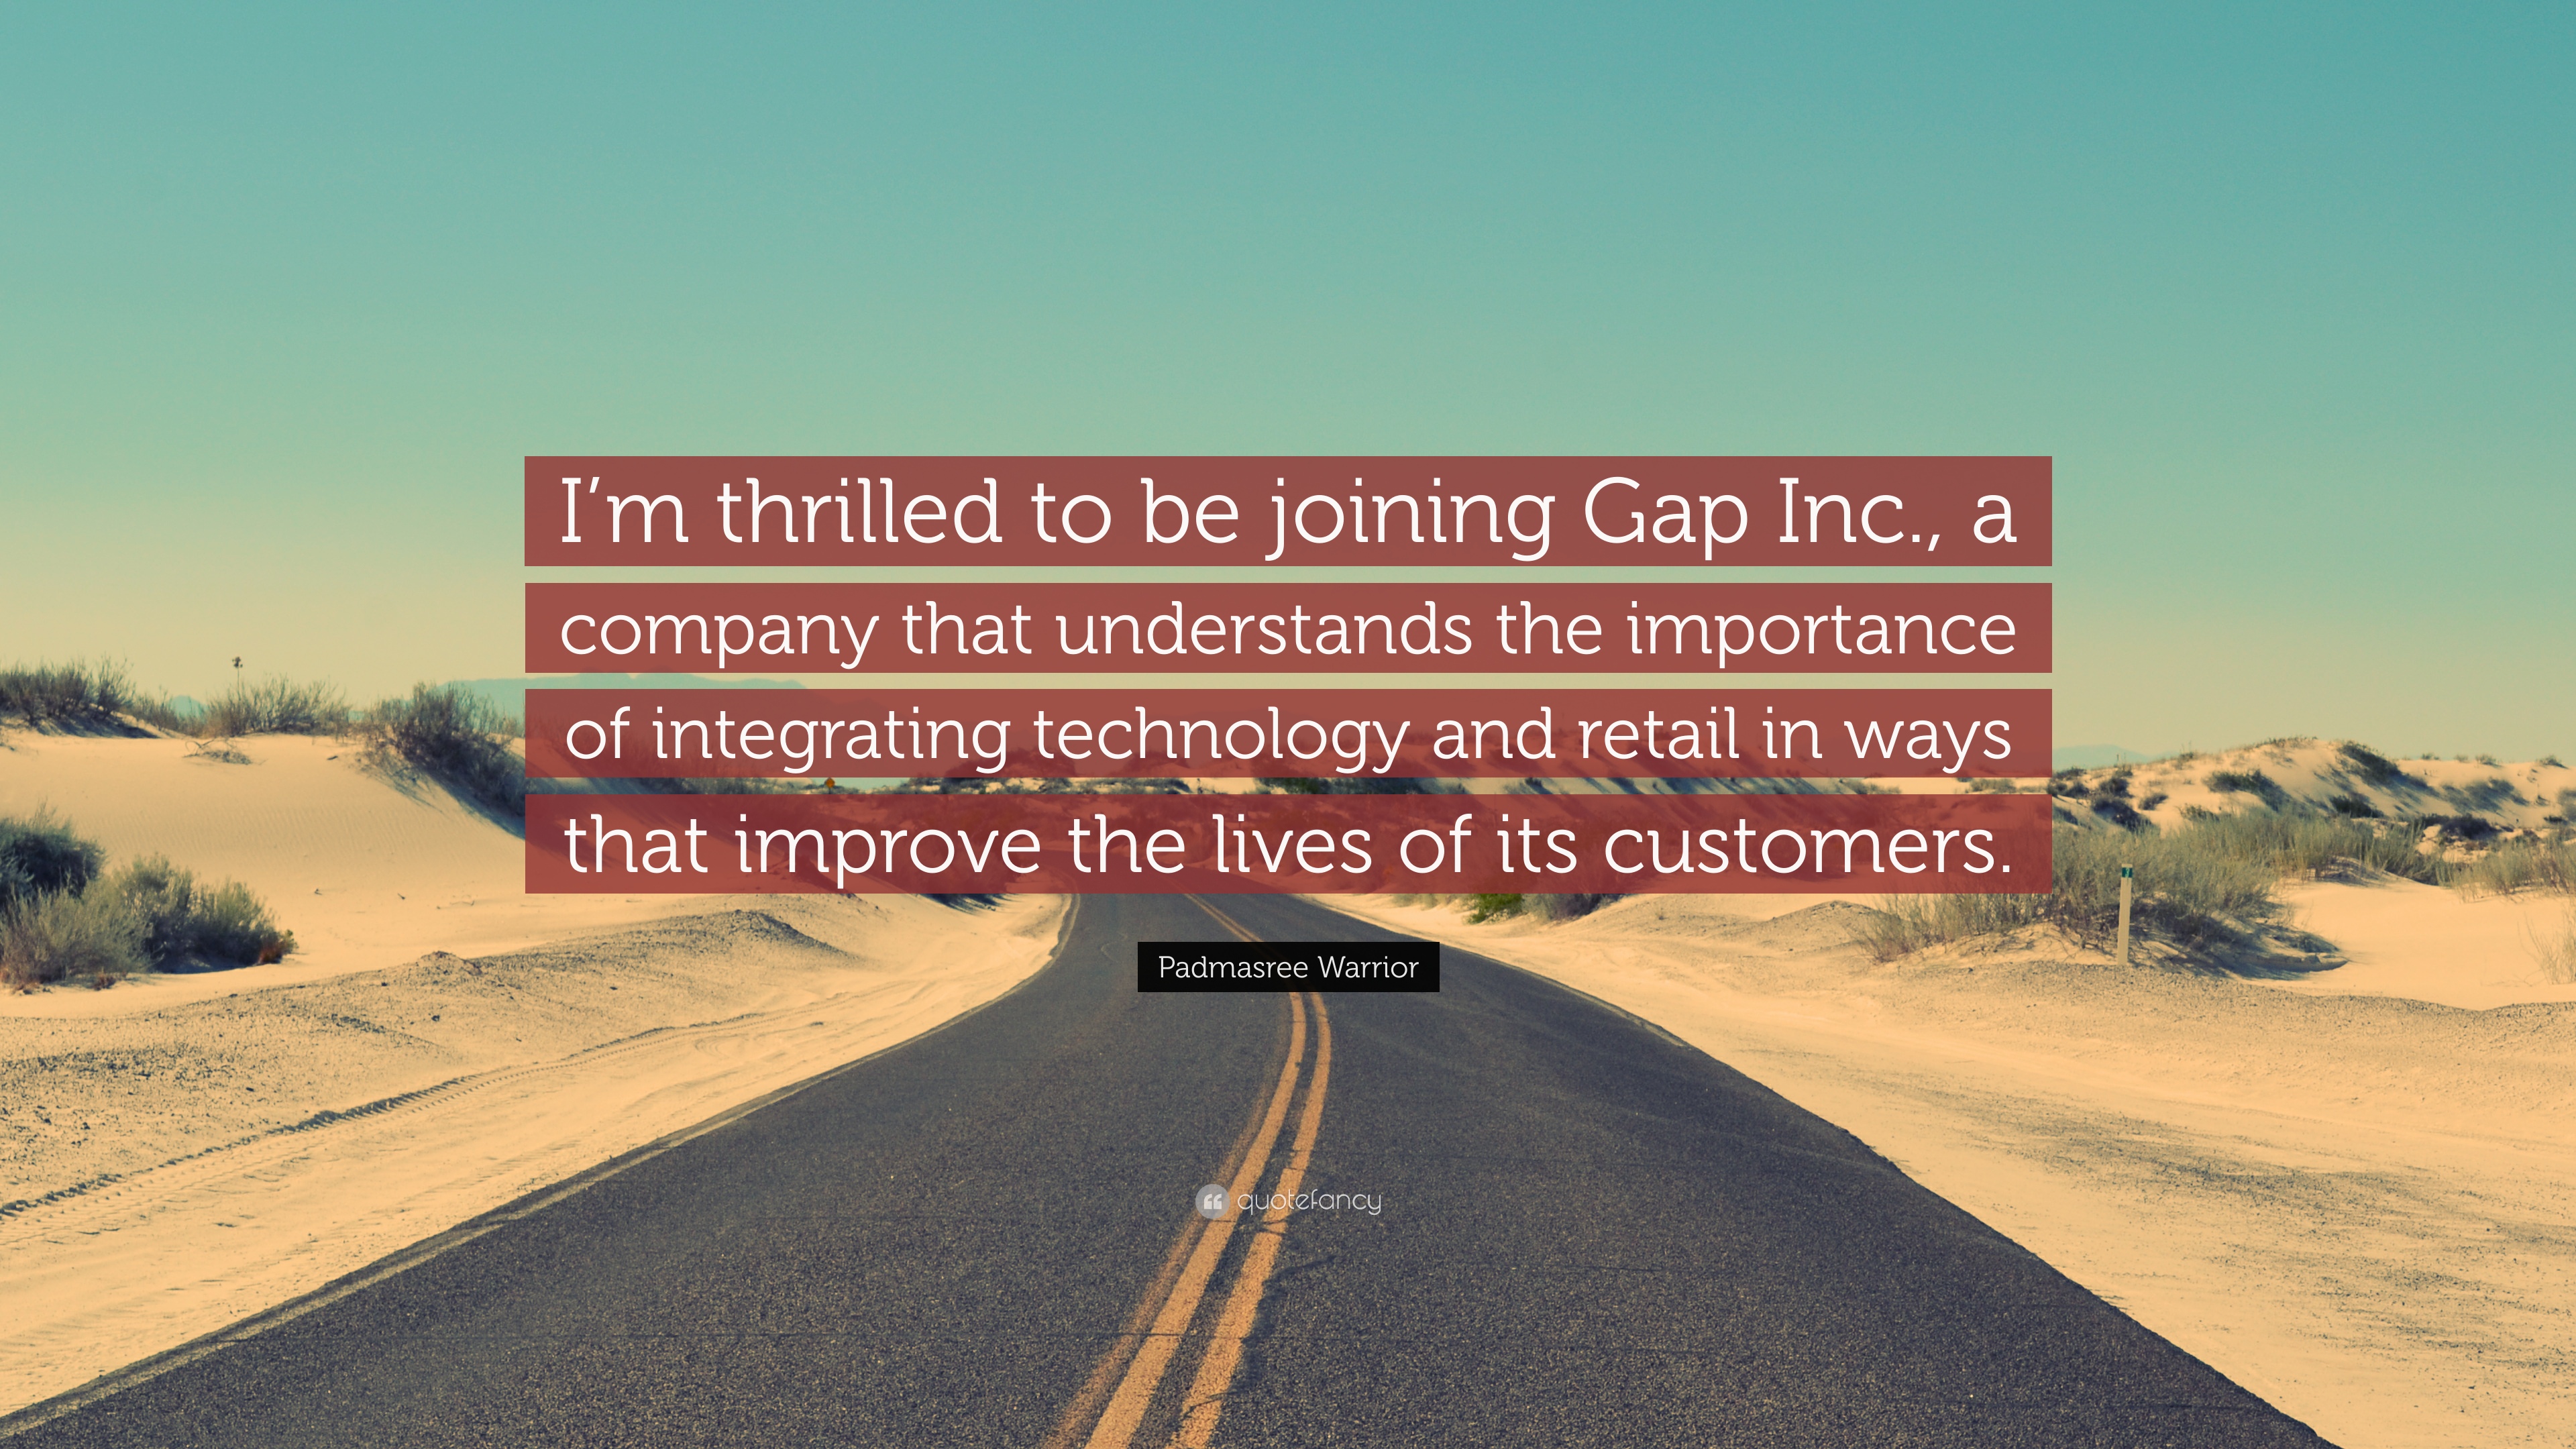 Padmasree Warrior Quote: “I'm thrilled to be joining Gap Inc., a